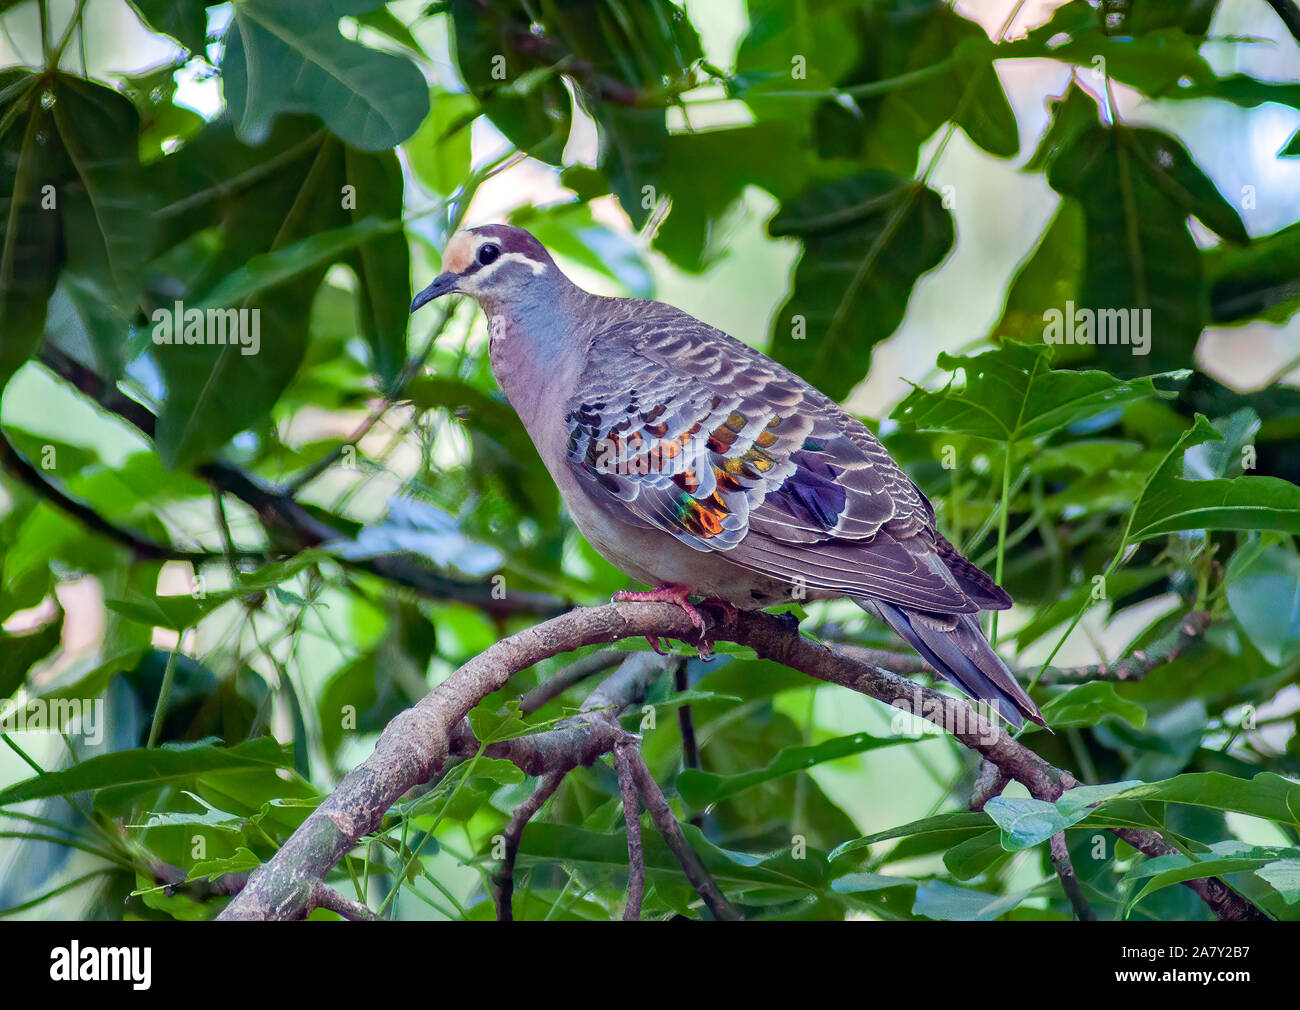 An Australian Common Bronzewing Pigeon perched on a branch in a leafy tree in a garden Stock Photo